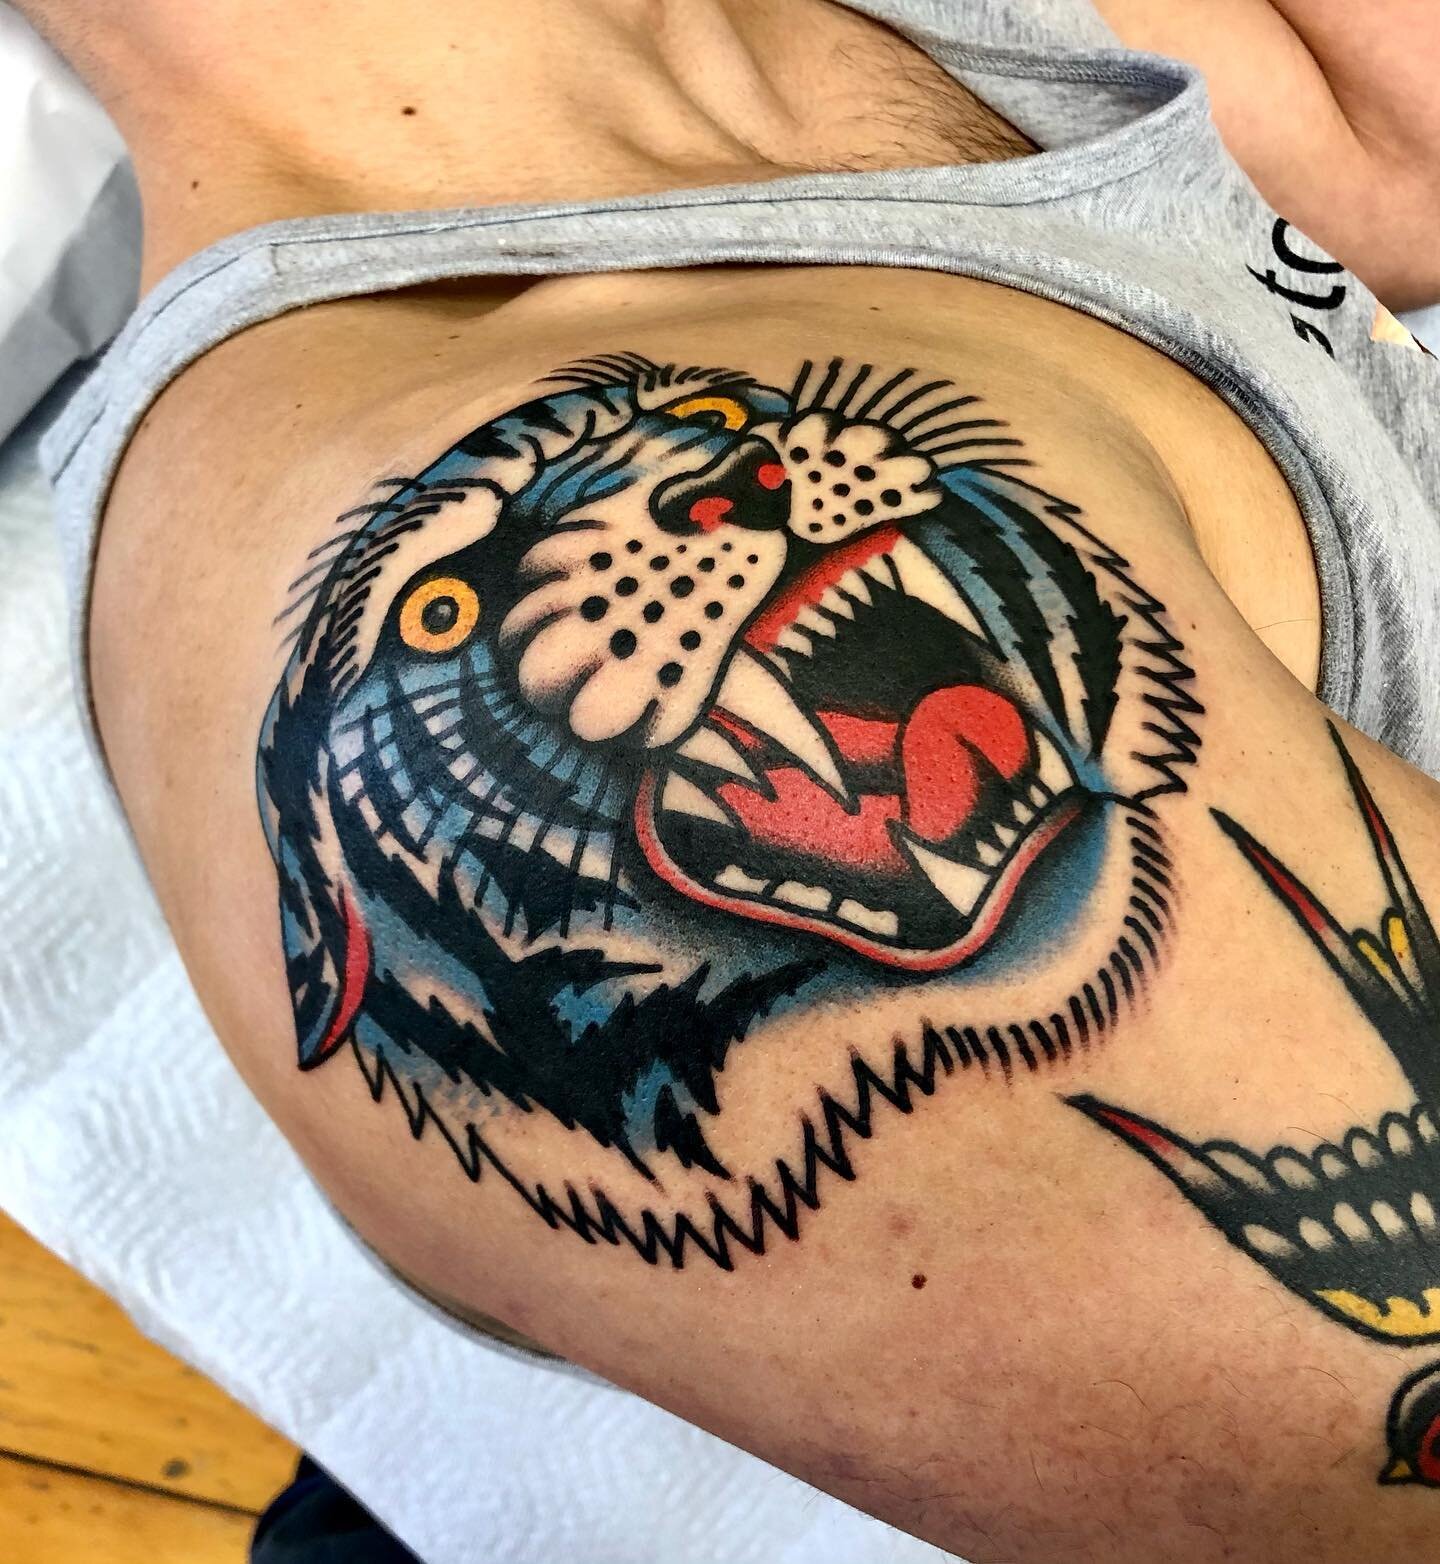 Got to do a fun blue version of this older flash of mine! Tigers are great. Thanks for looking! #tattoo #tattoos #traditionaltattoos #bright_and_bold #skinart #oldlines #oldschooltattoo #traditionalclub #tattooing #tattooart #tradworkers #tradtattoo 